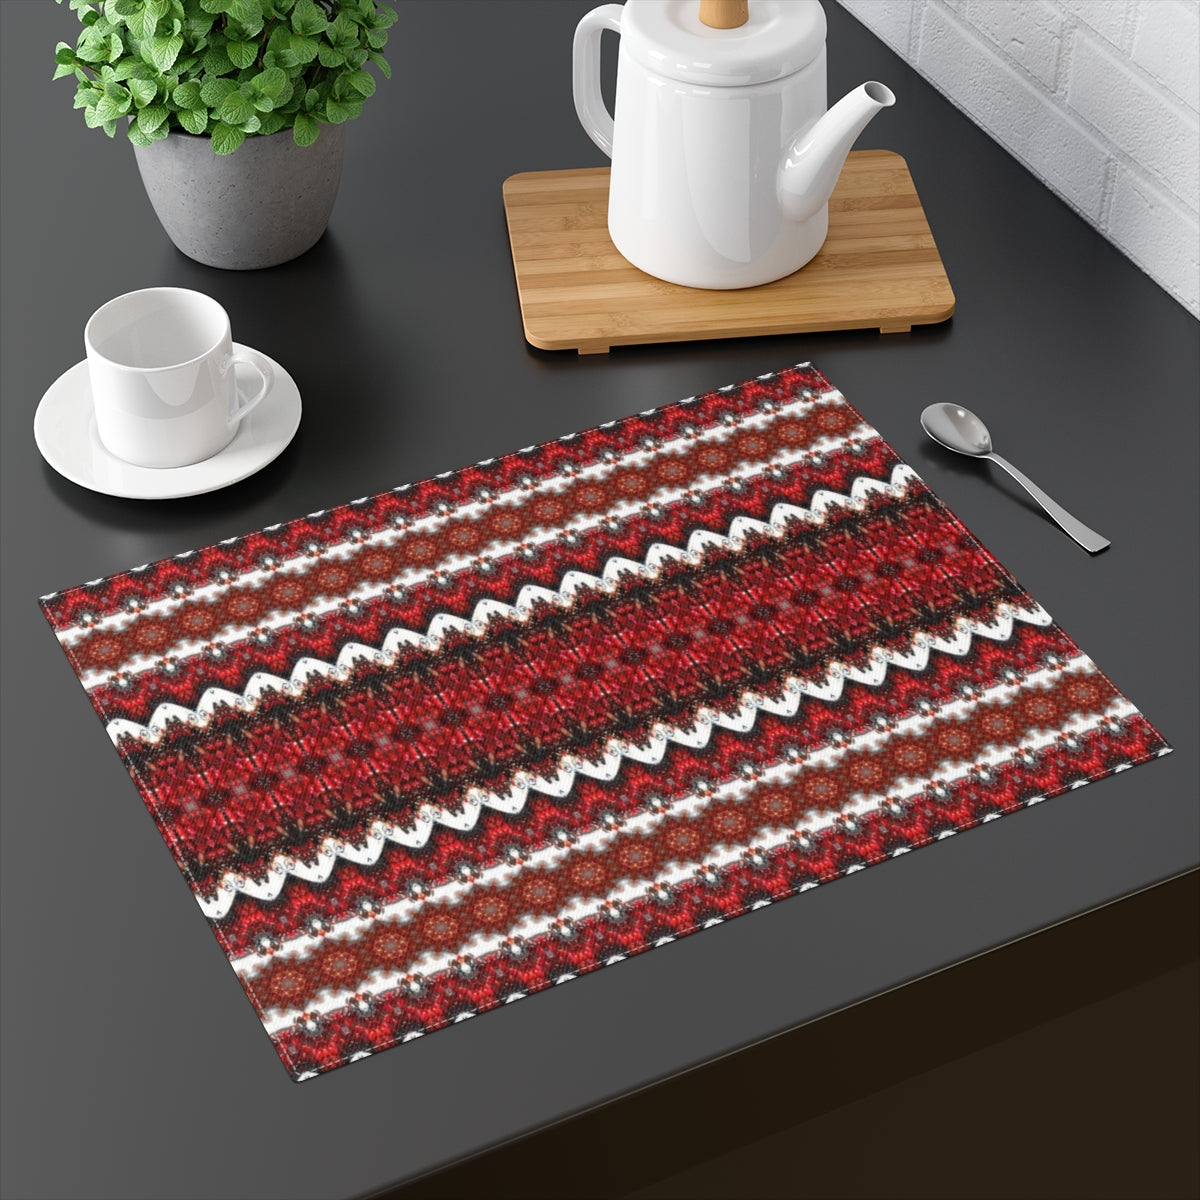 Gloggenstein Design - Red and white placemats